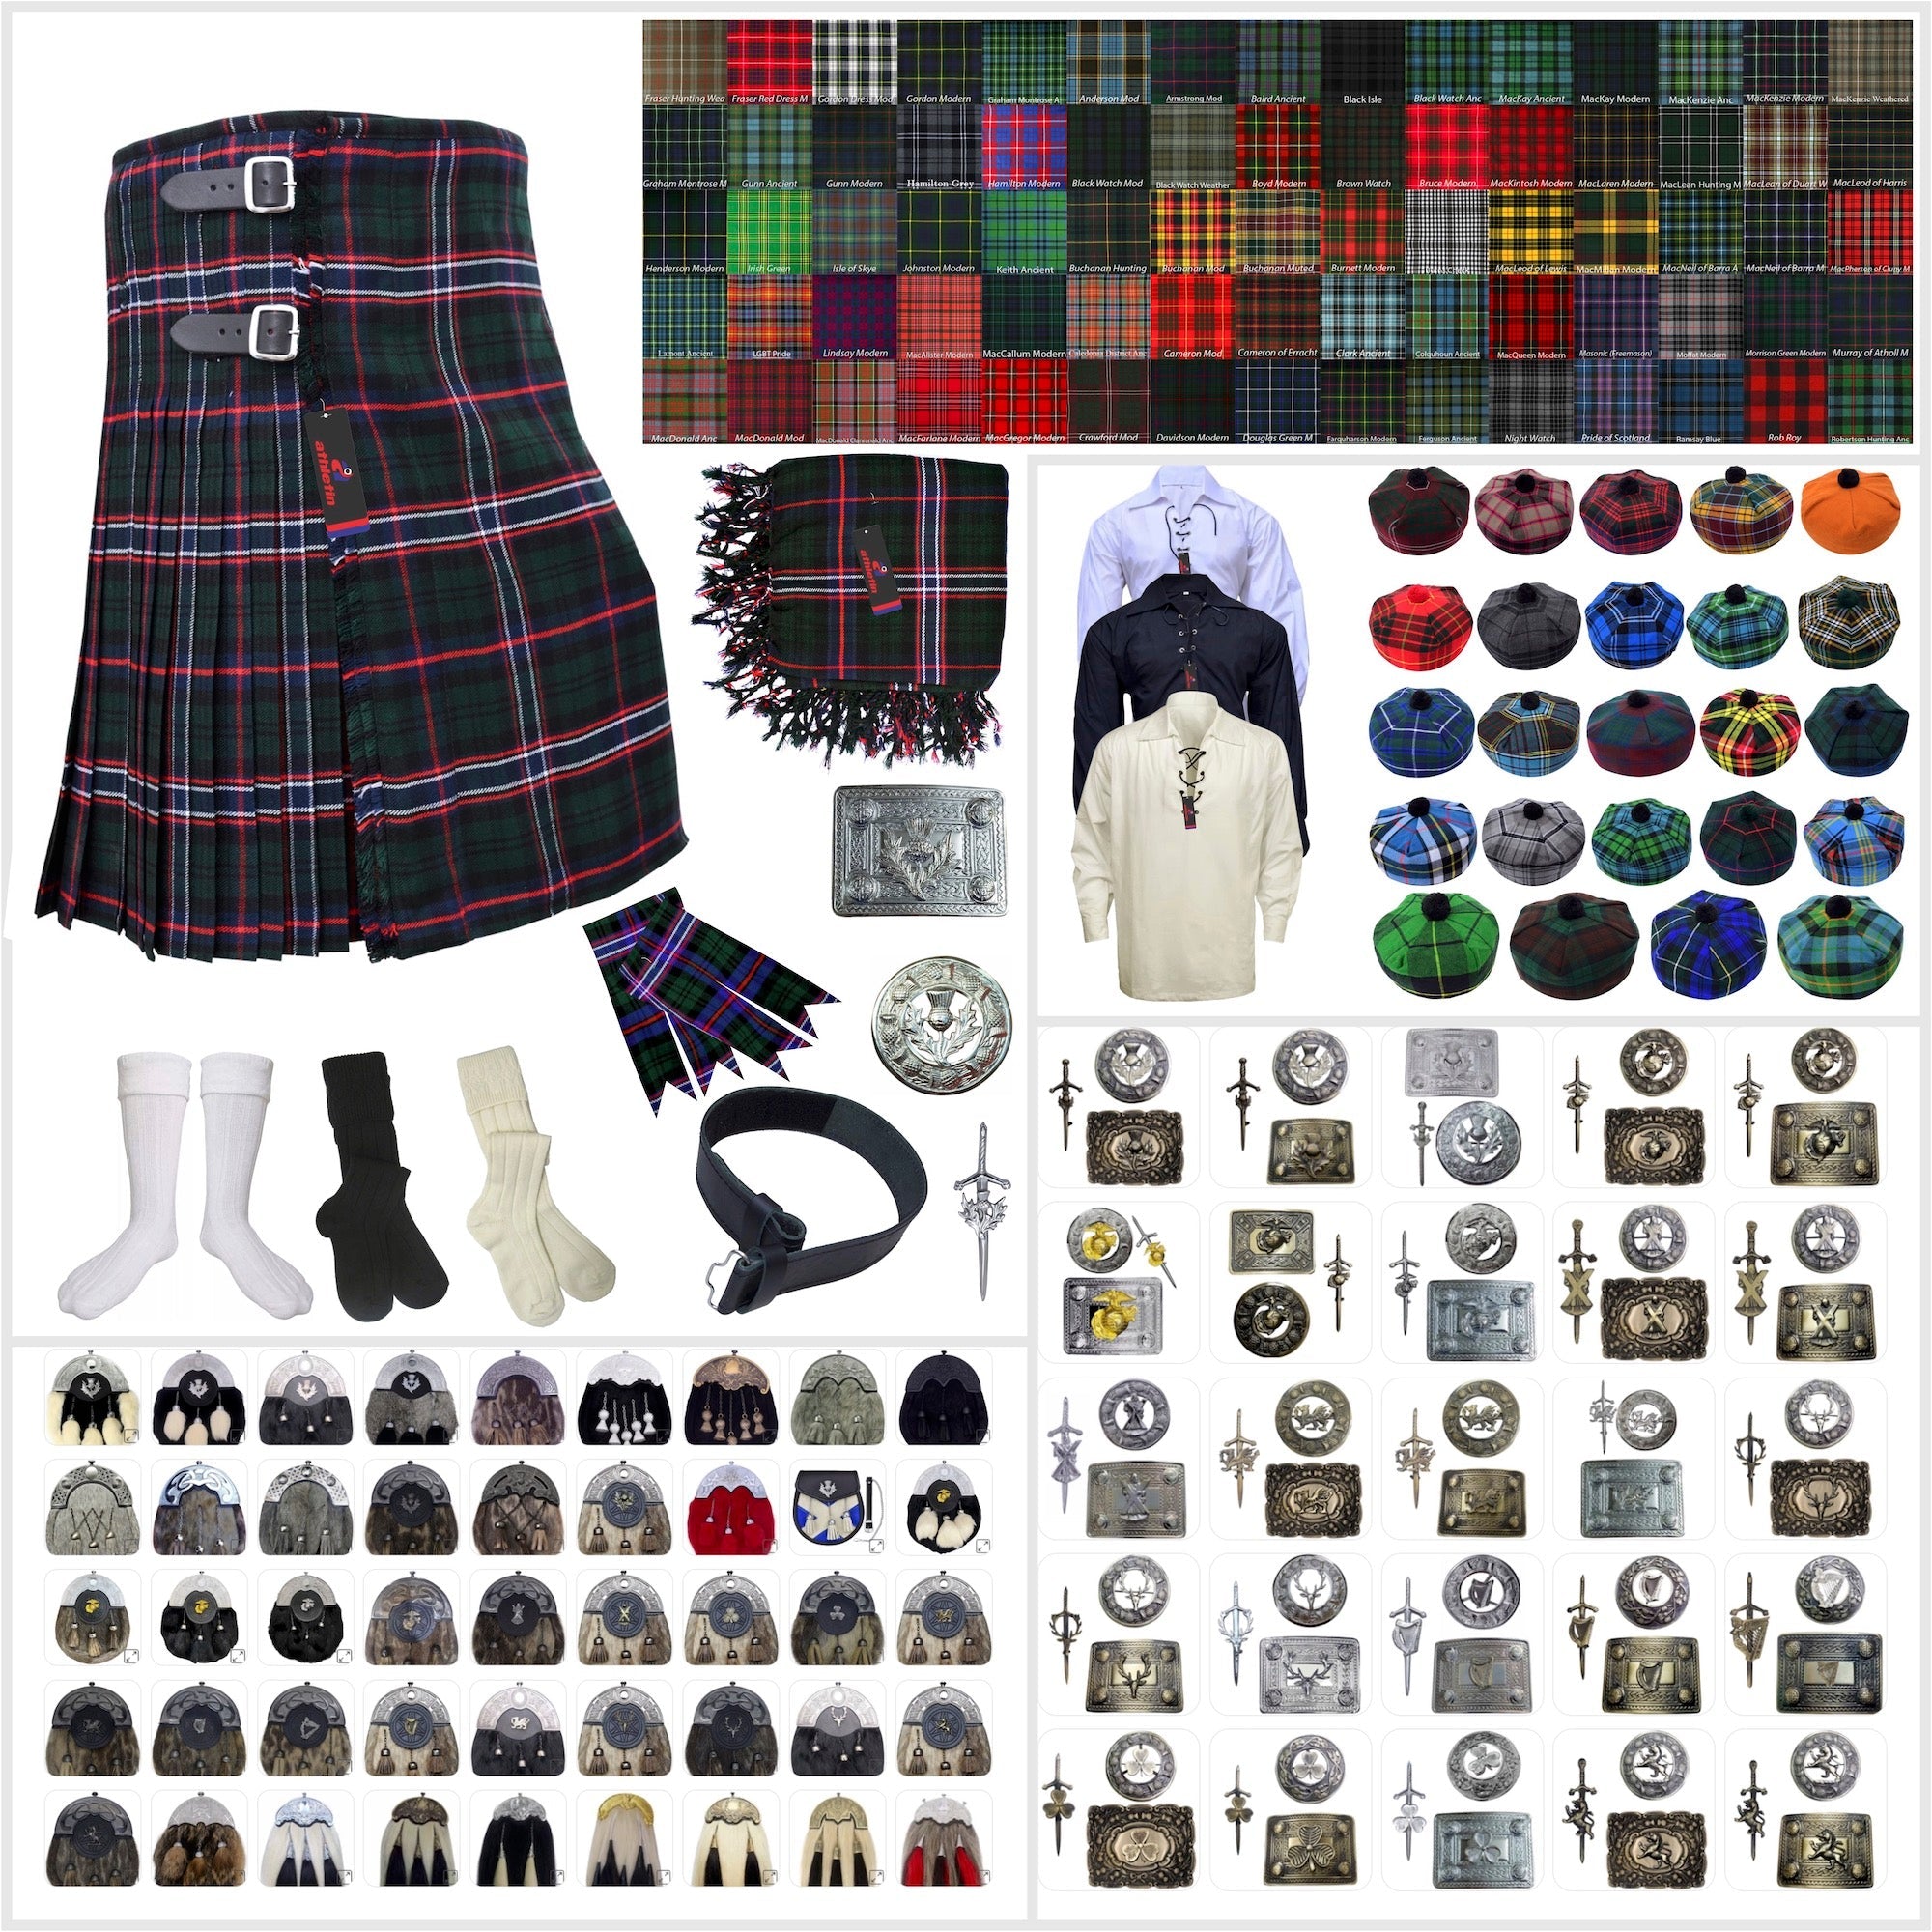 Scottish National Tartan Kilt Outfit - Heritage and Style Combined